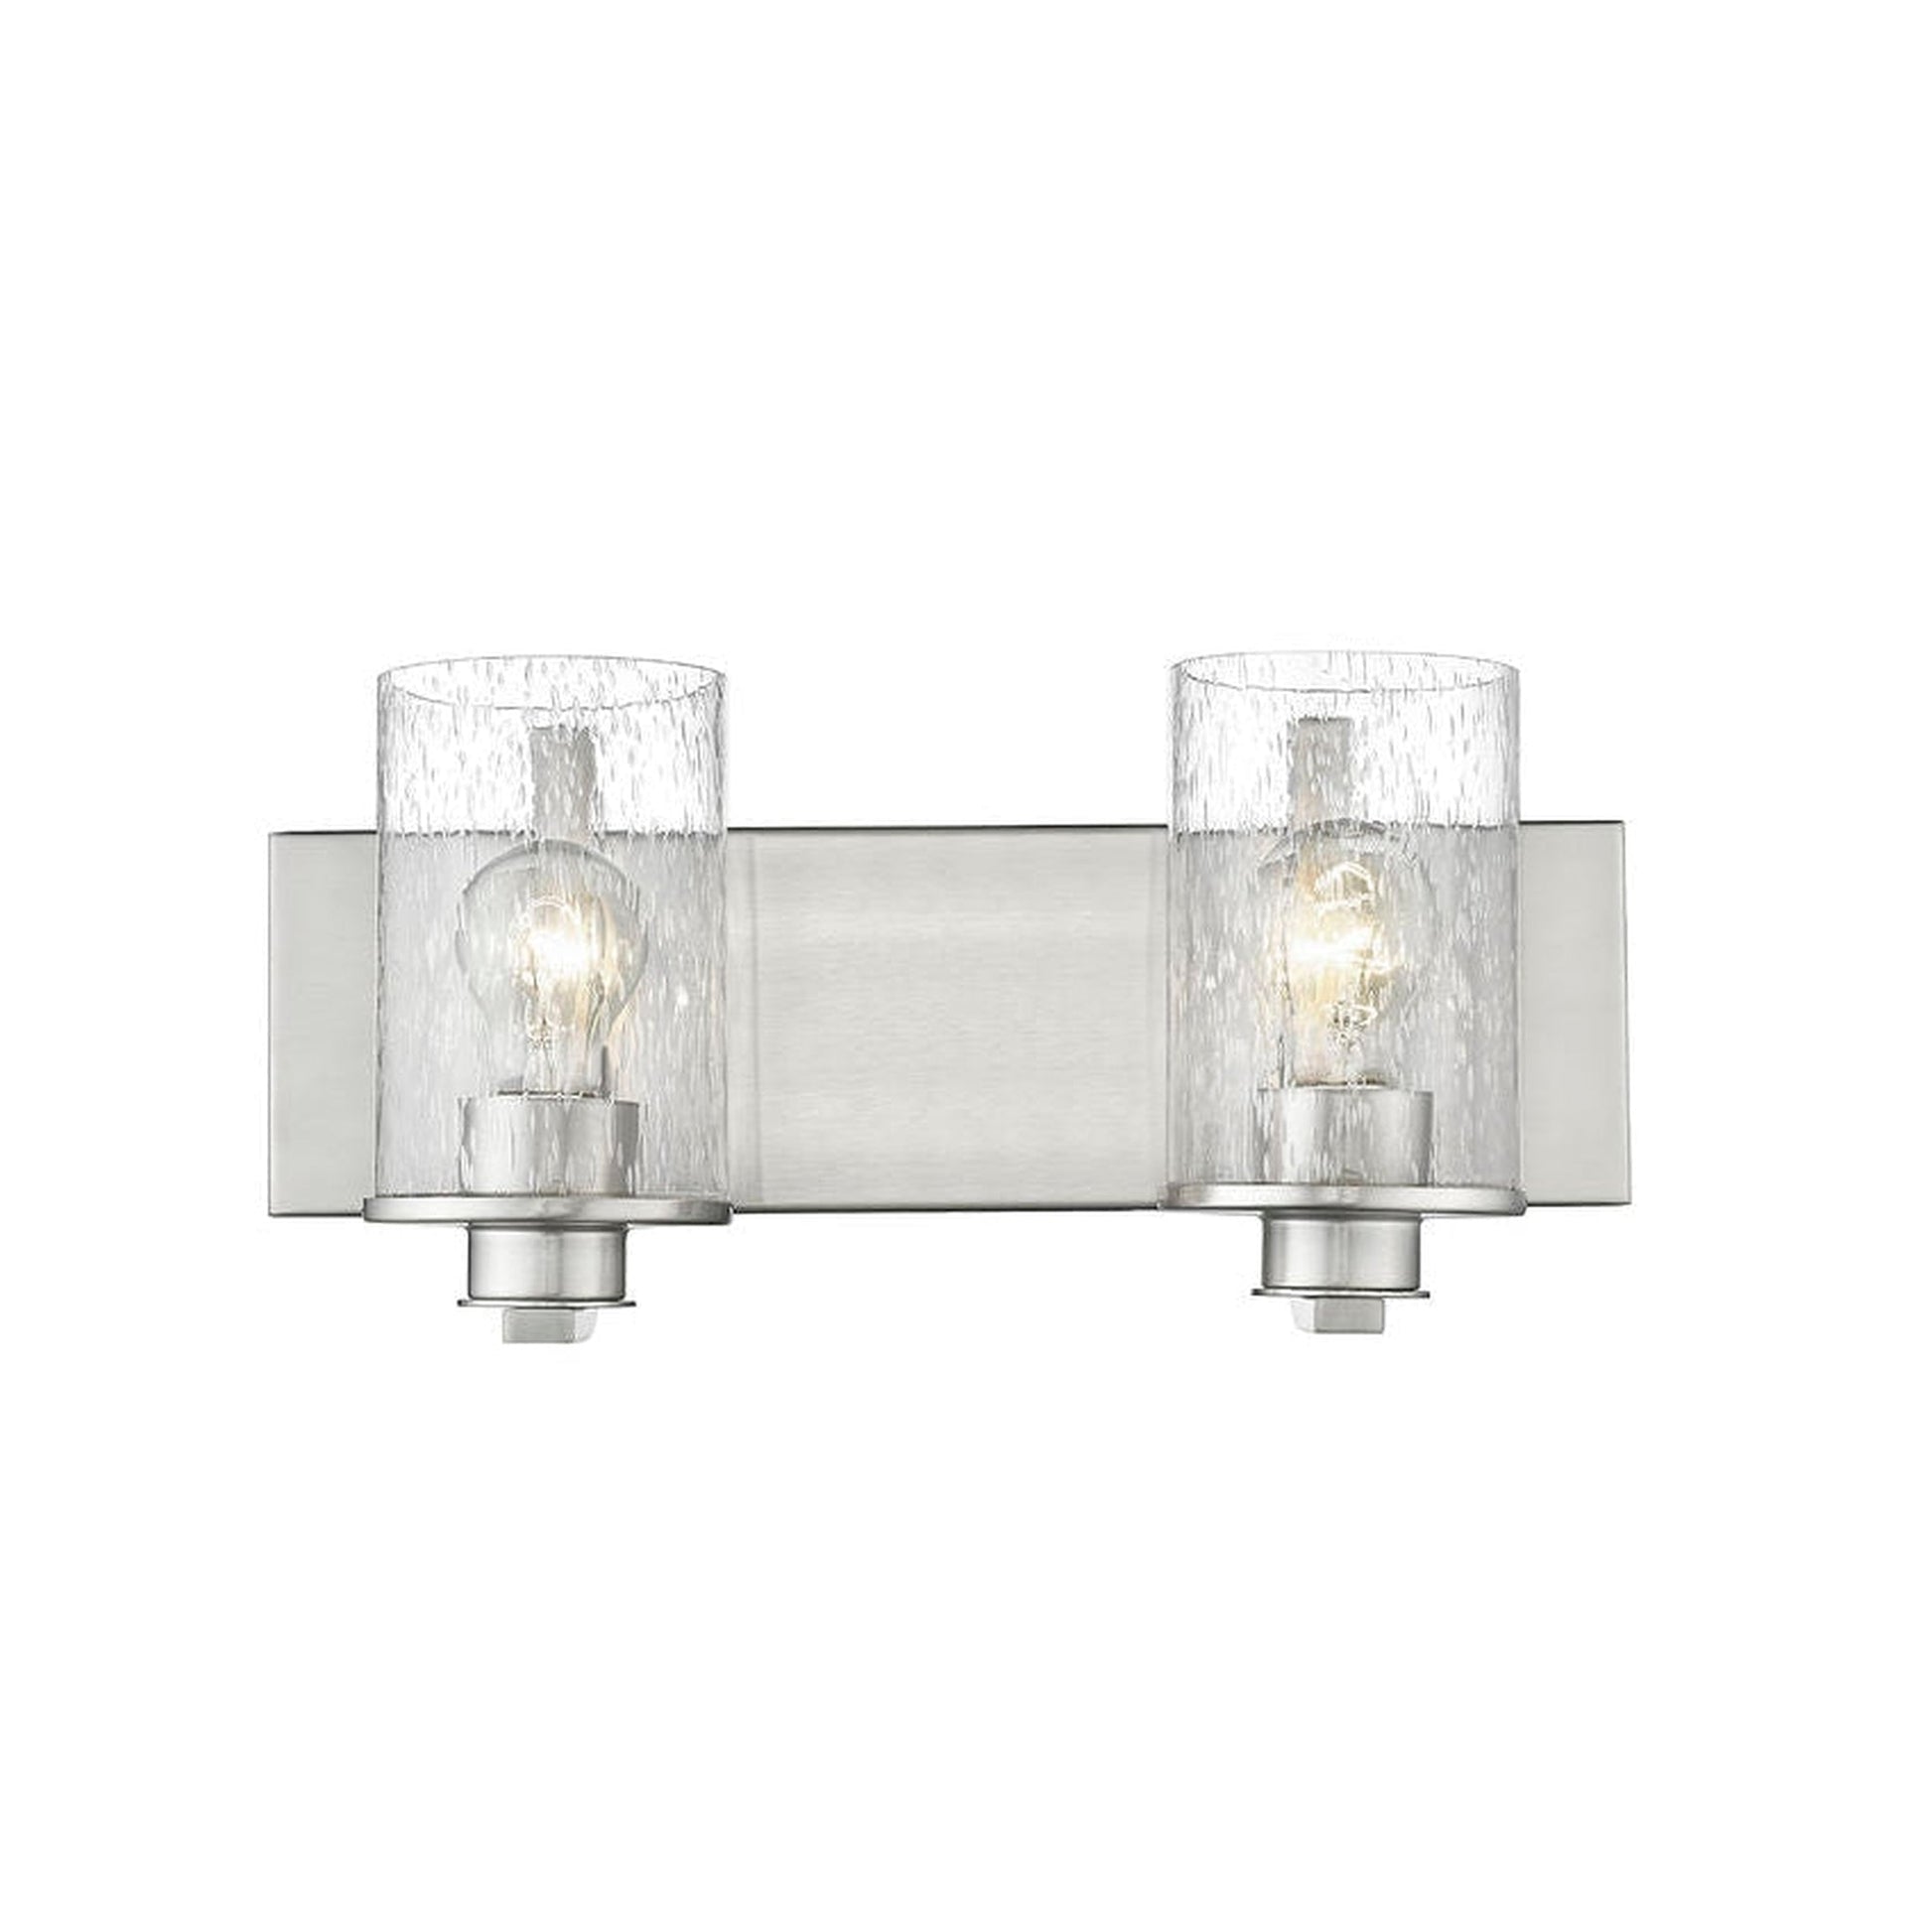 Z-Lite Beckett 16" 2-Light Brushed Nickel Vanity Light With Clear Seedy Glass Shade